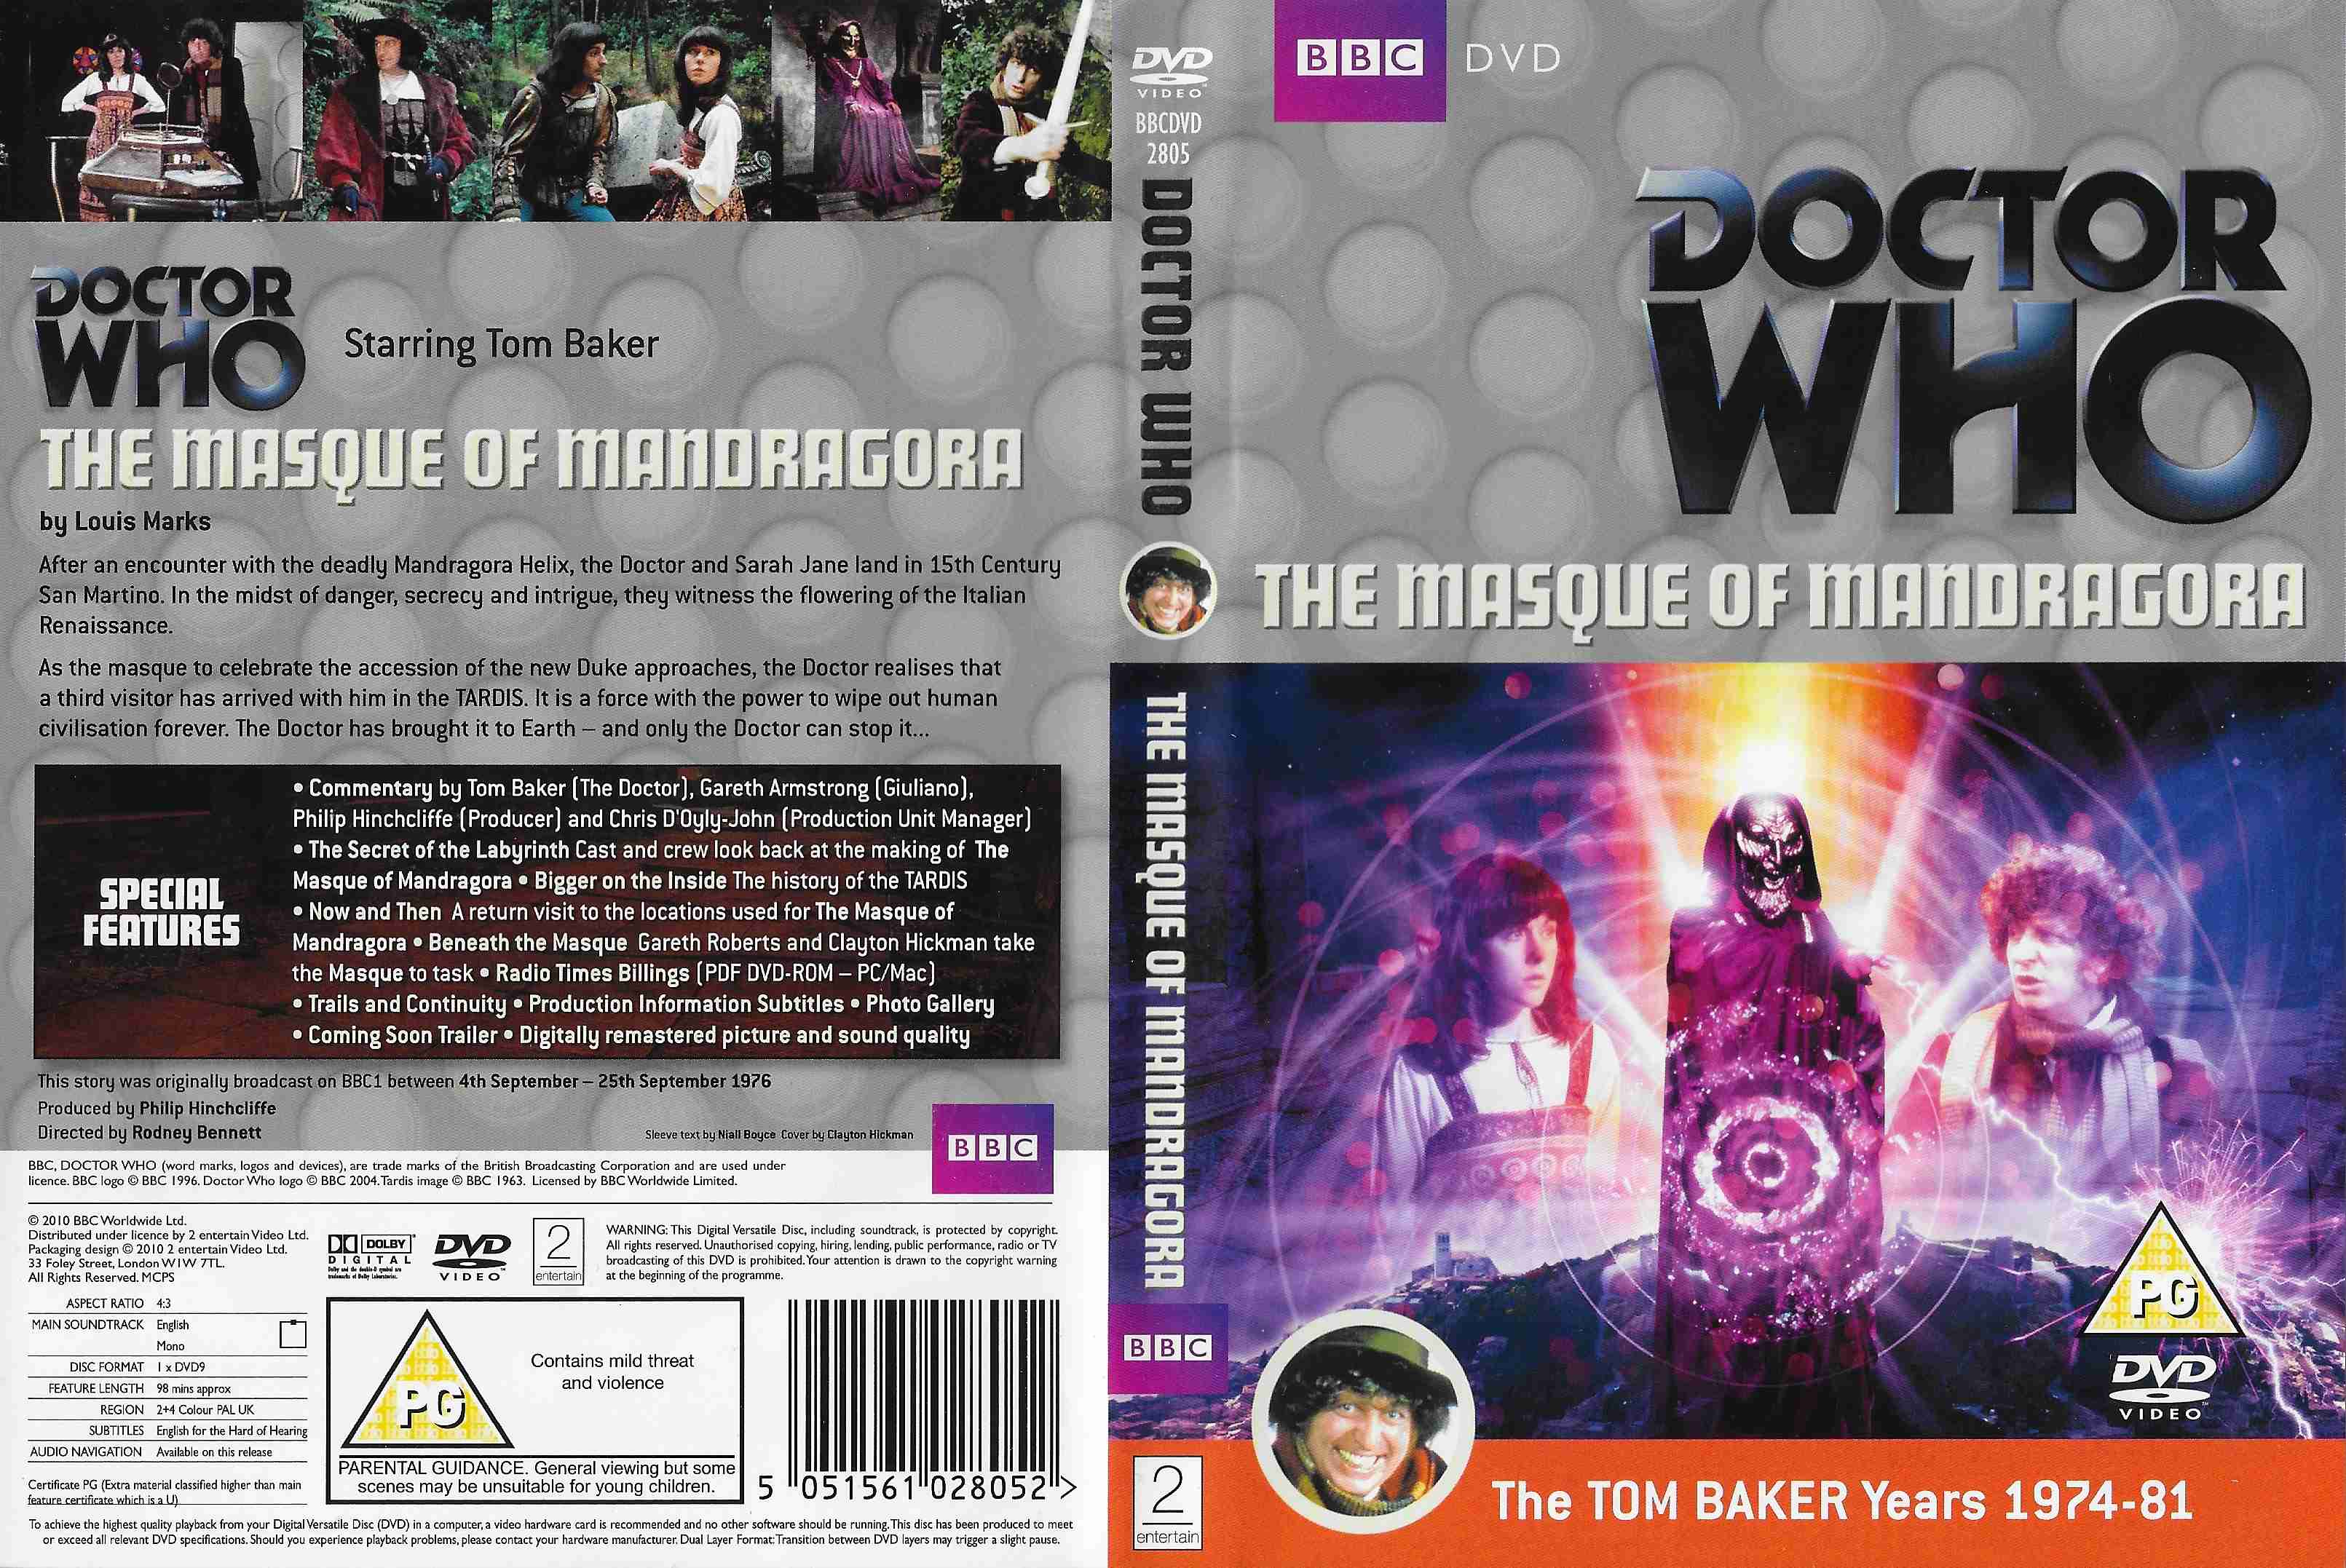 Picture of BBCDVD 2805 Doctor Who - The masque of Mandragona by artist Terry Nation from the BBC records and Tapes library